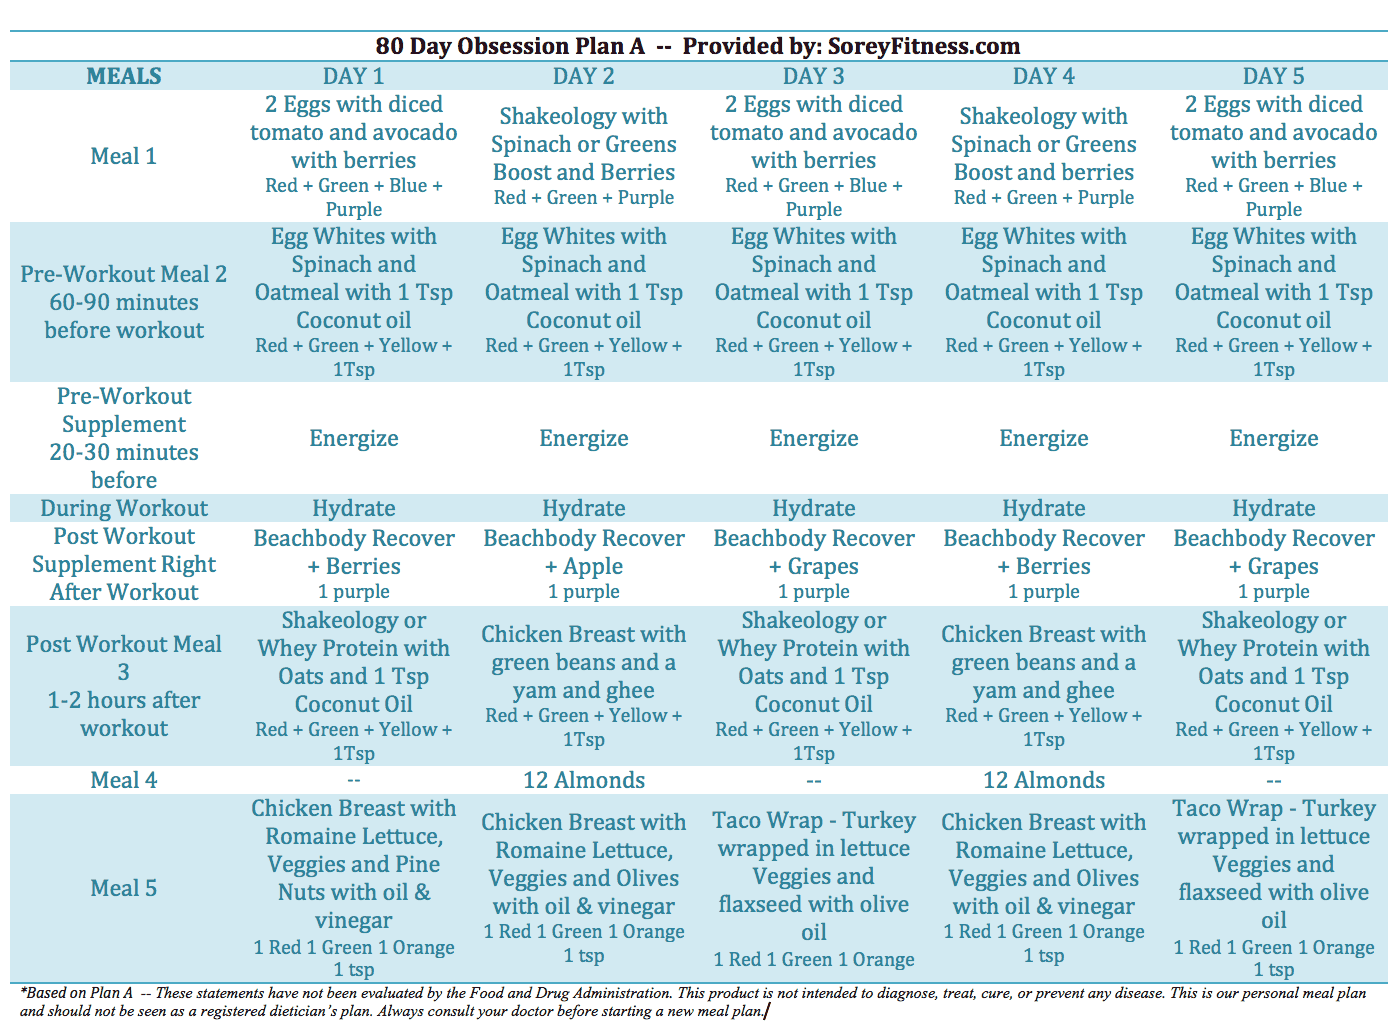 80-day-obsession-meal-plan-free-plan-to-use-today